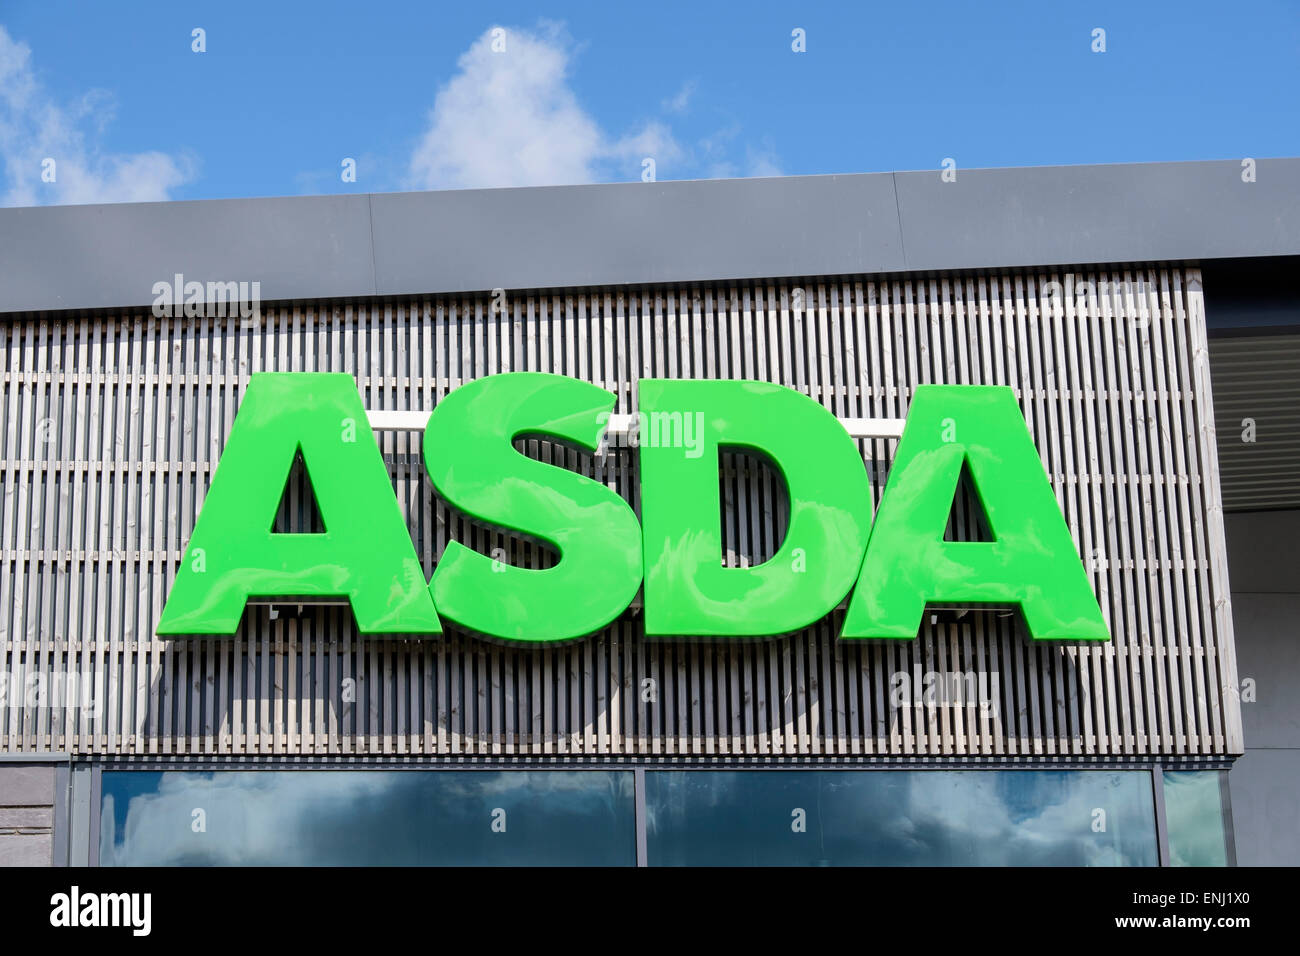 Green Asda supermarket store name sign on side of shop building in Bangor, Gwynedd, Wales, UK, Britain Stock Photo